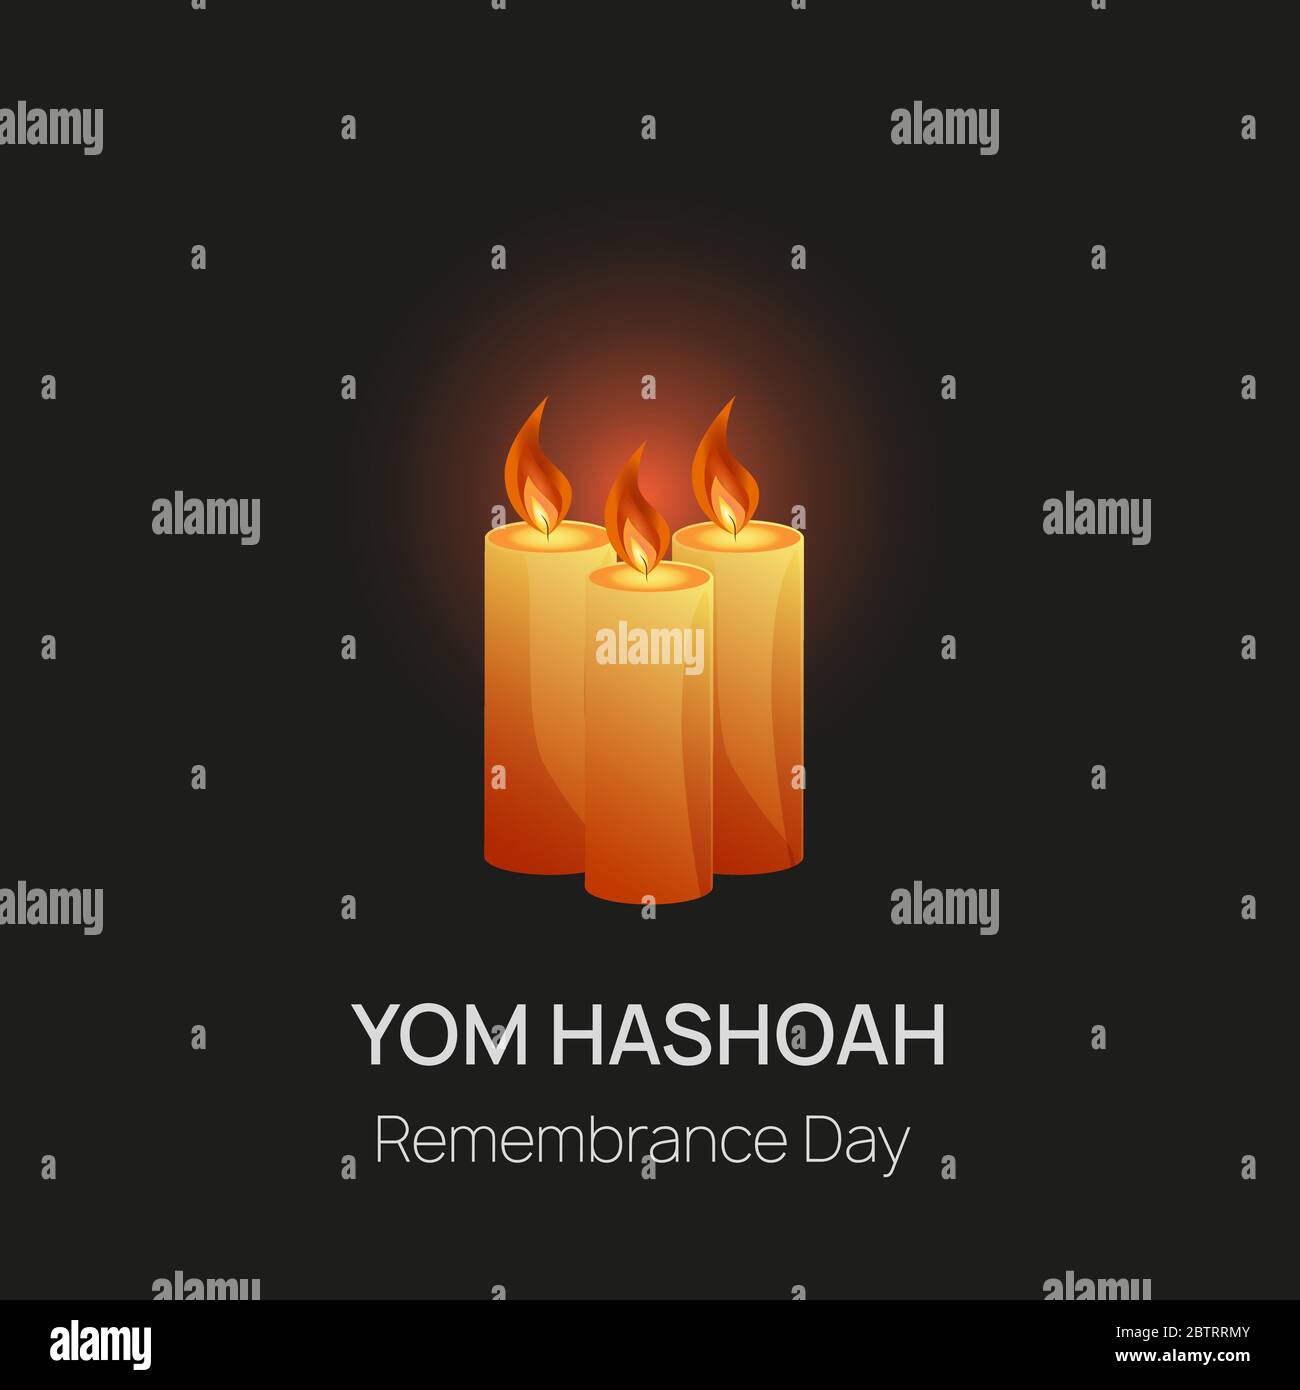 Memorial Day template. International Holocaust Remembrance Day with a Burning Candle on a Dark Background. Stock Vector